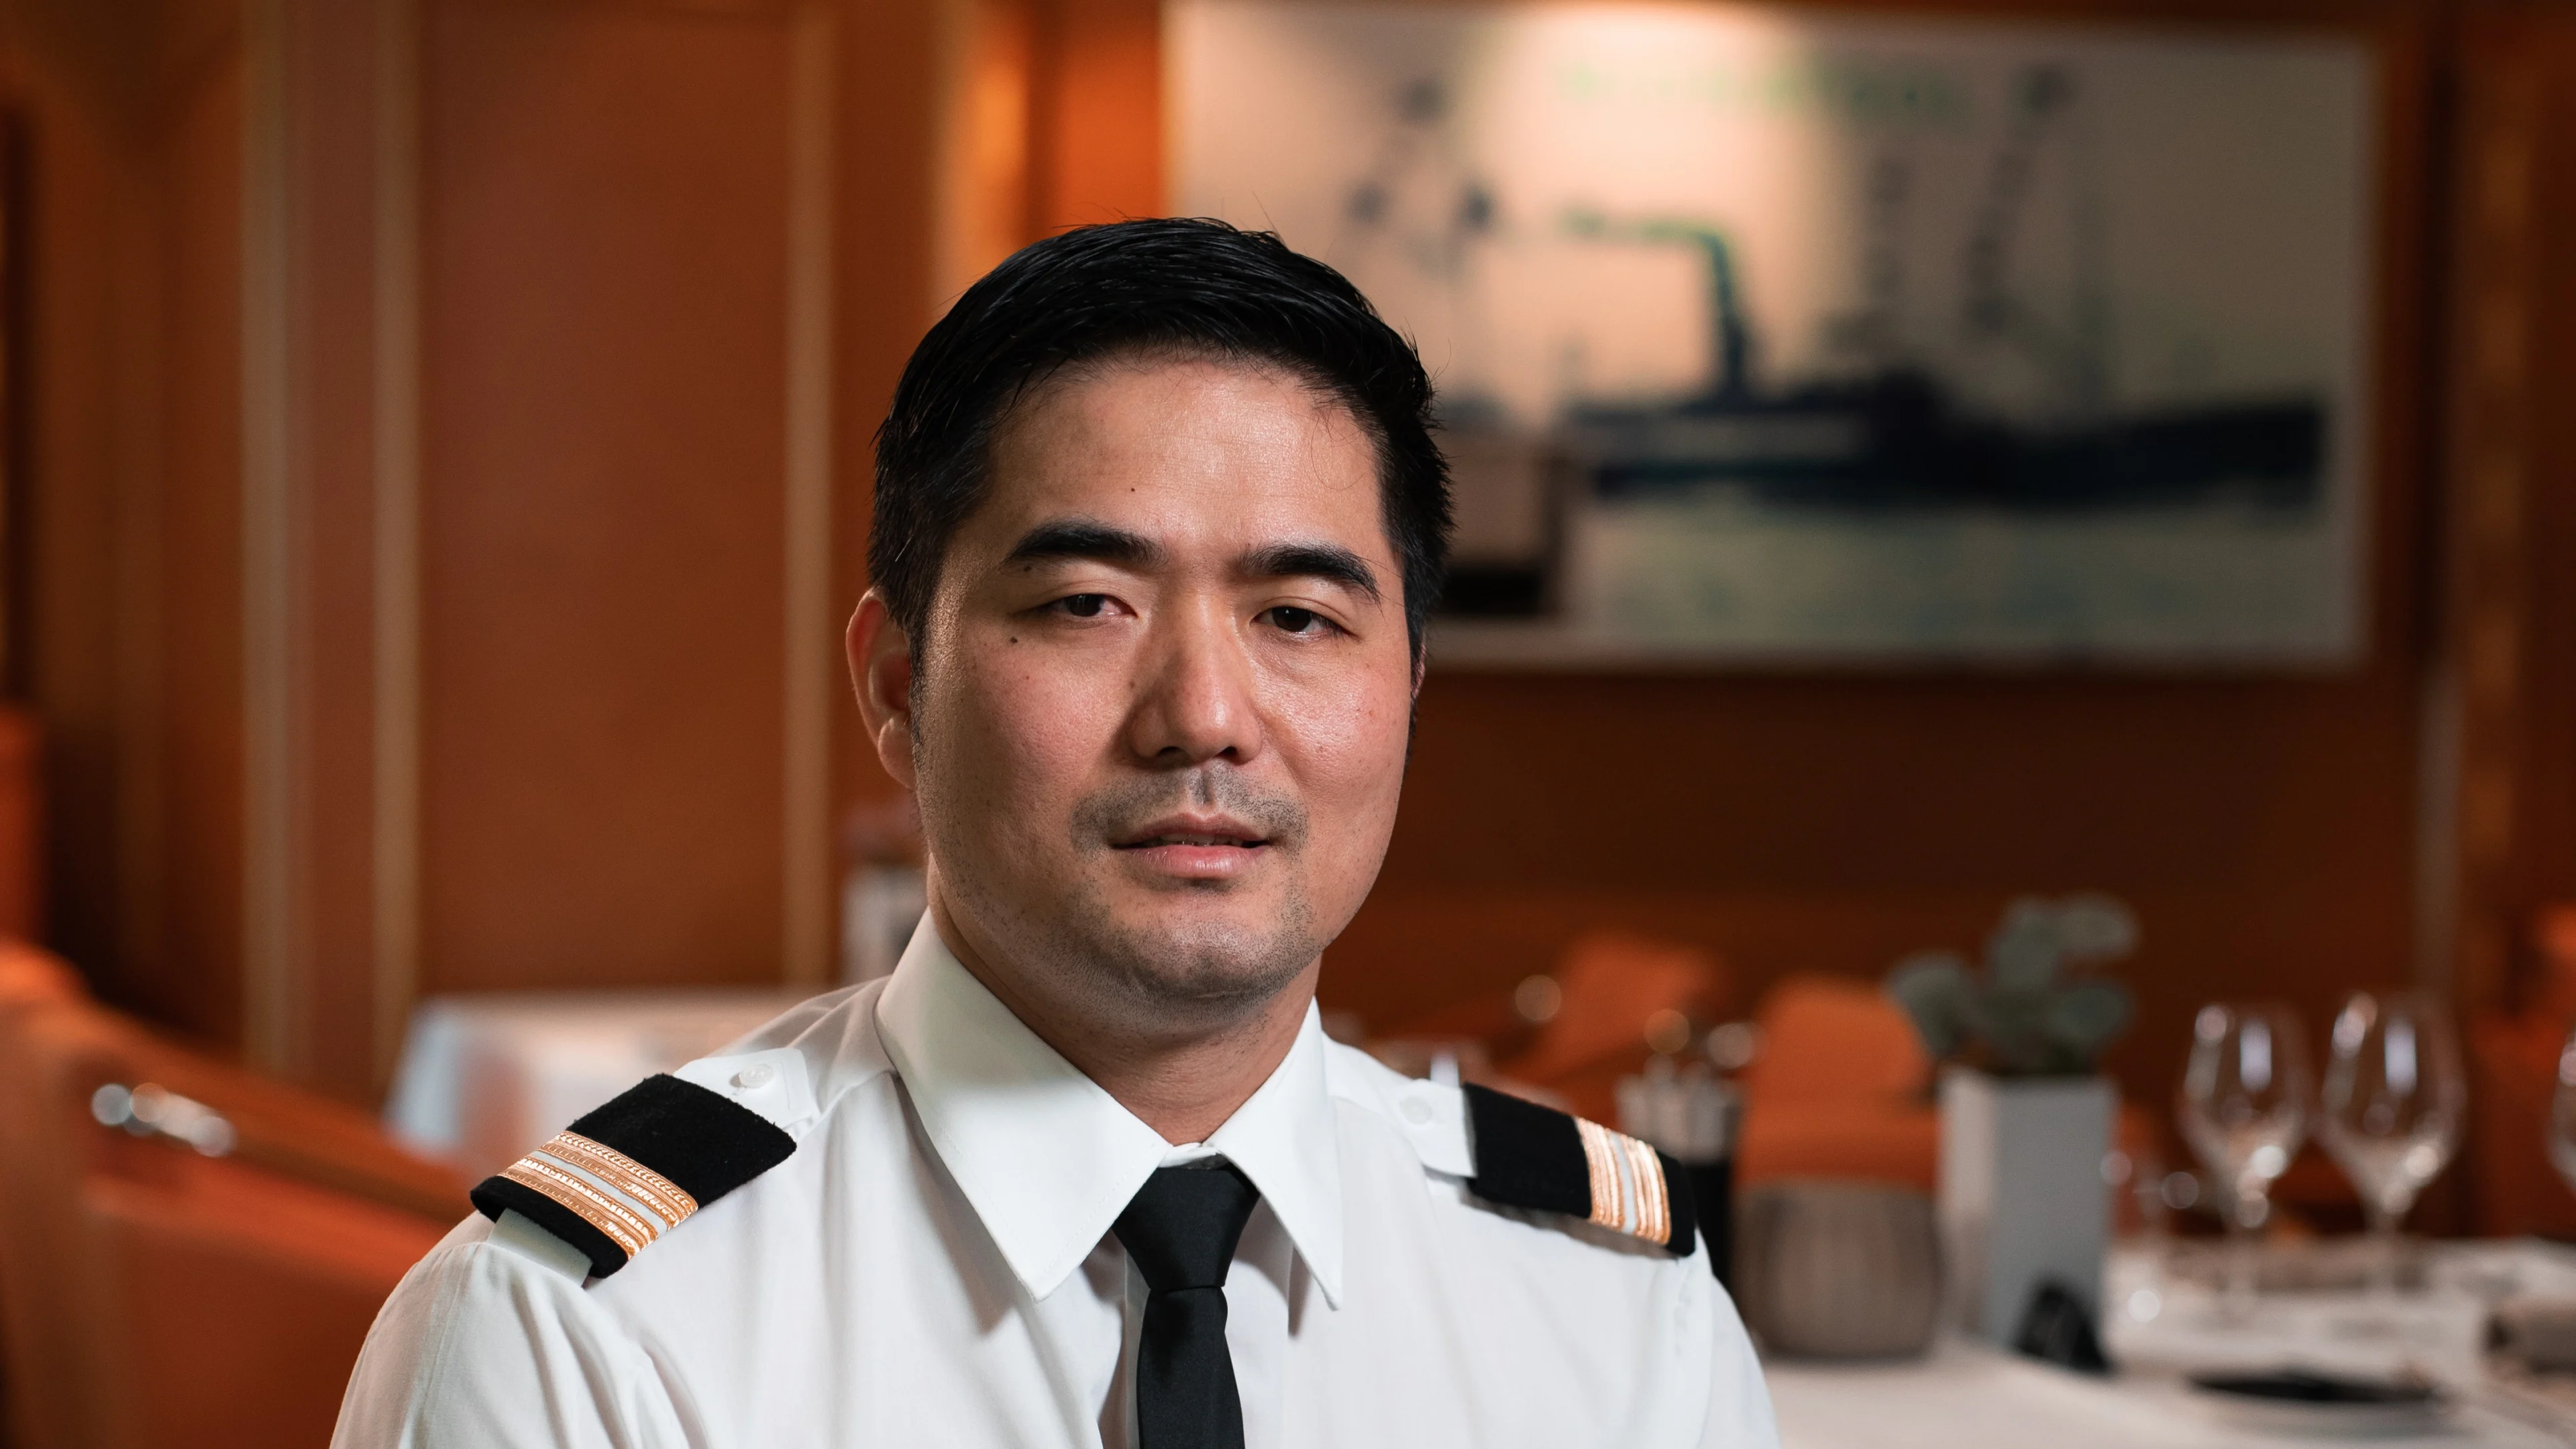 Ariel Valencia, Restaurant Manager onboard MS Maud - Photo Credit: Tom Woodstock.